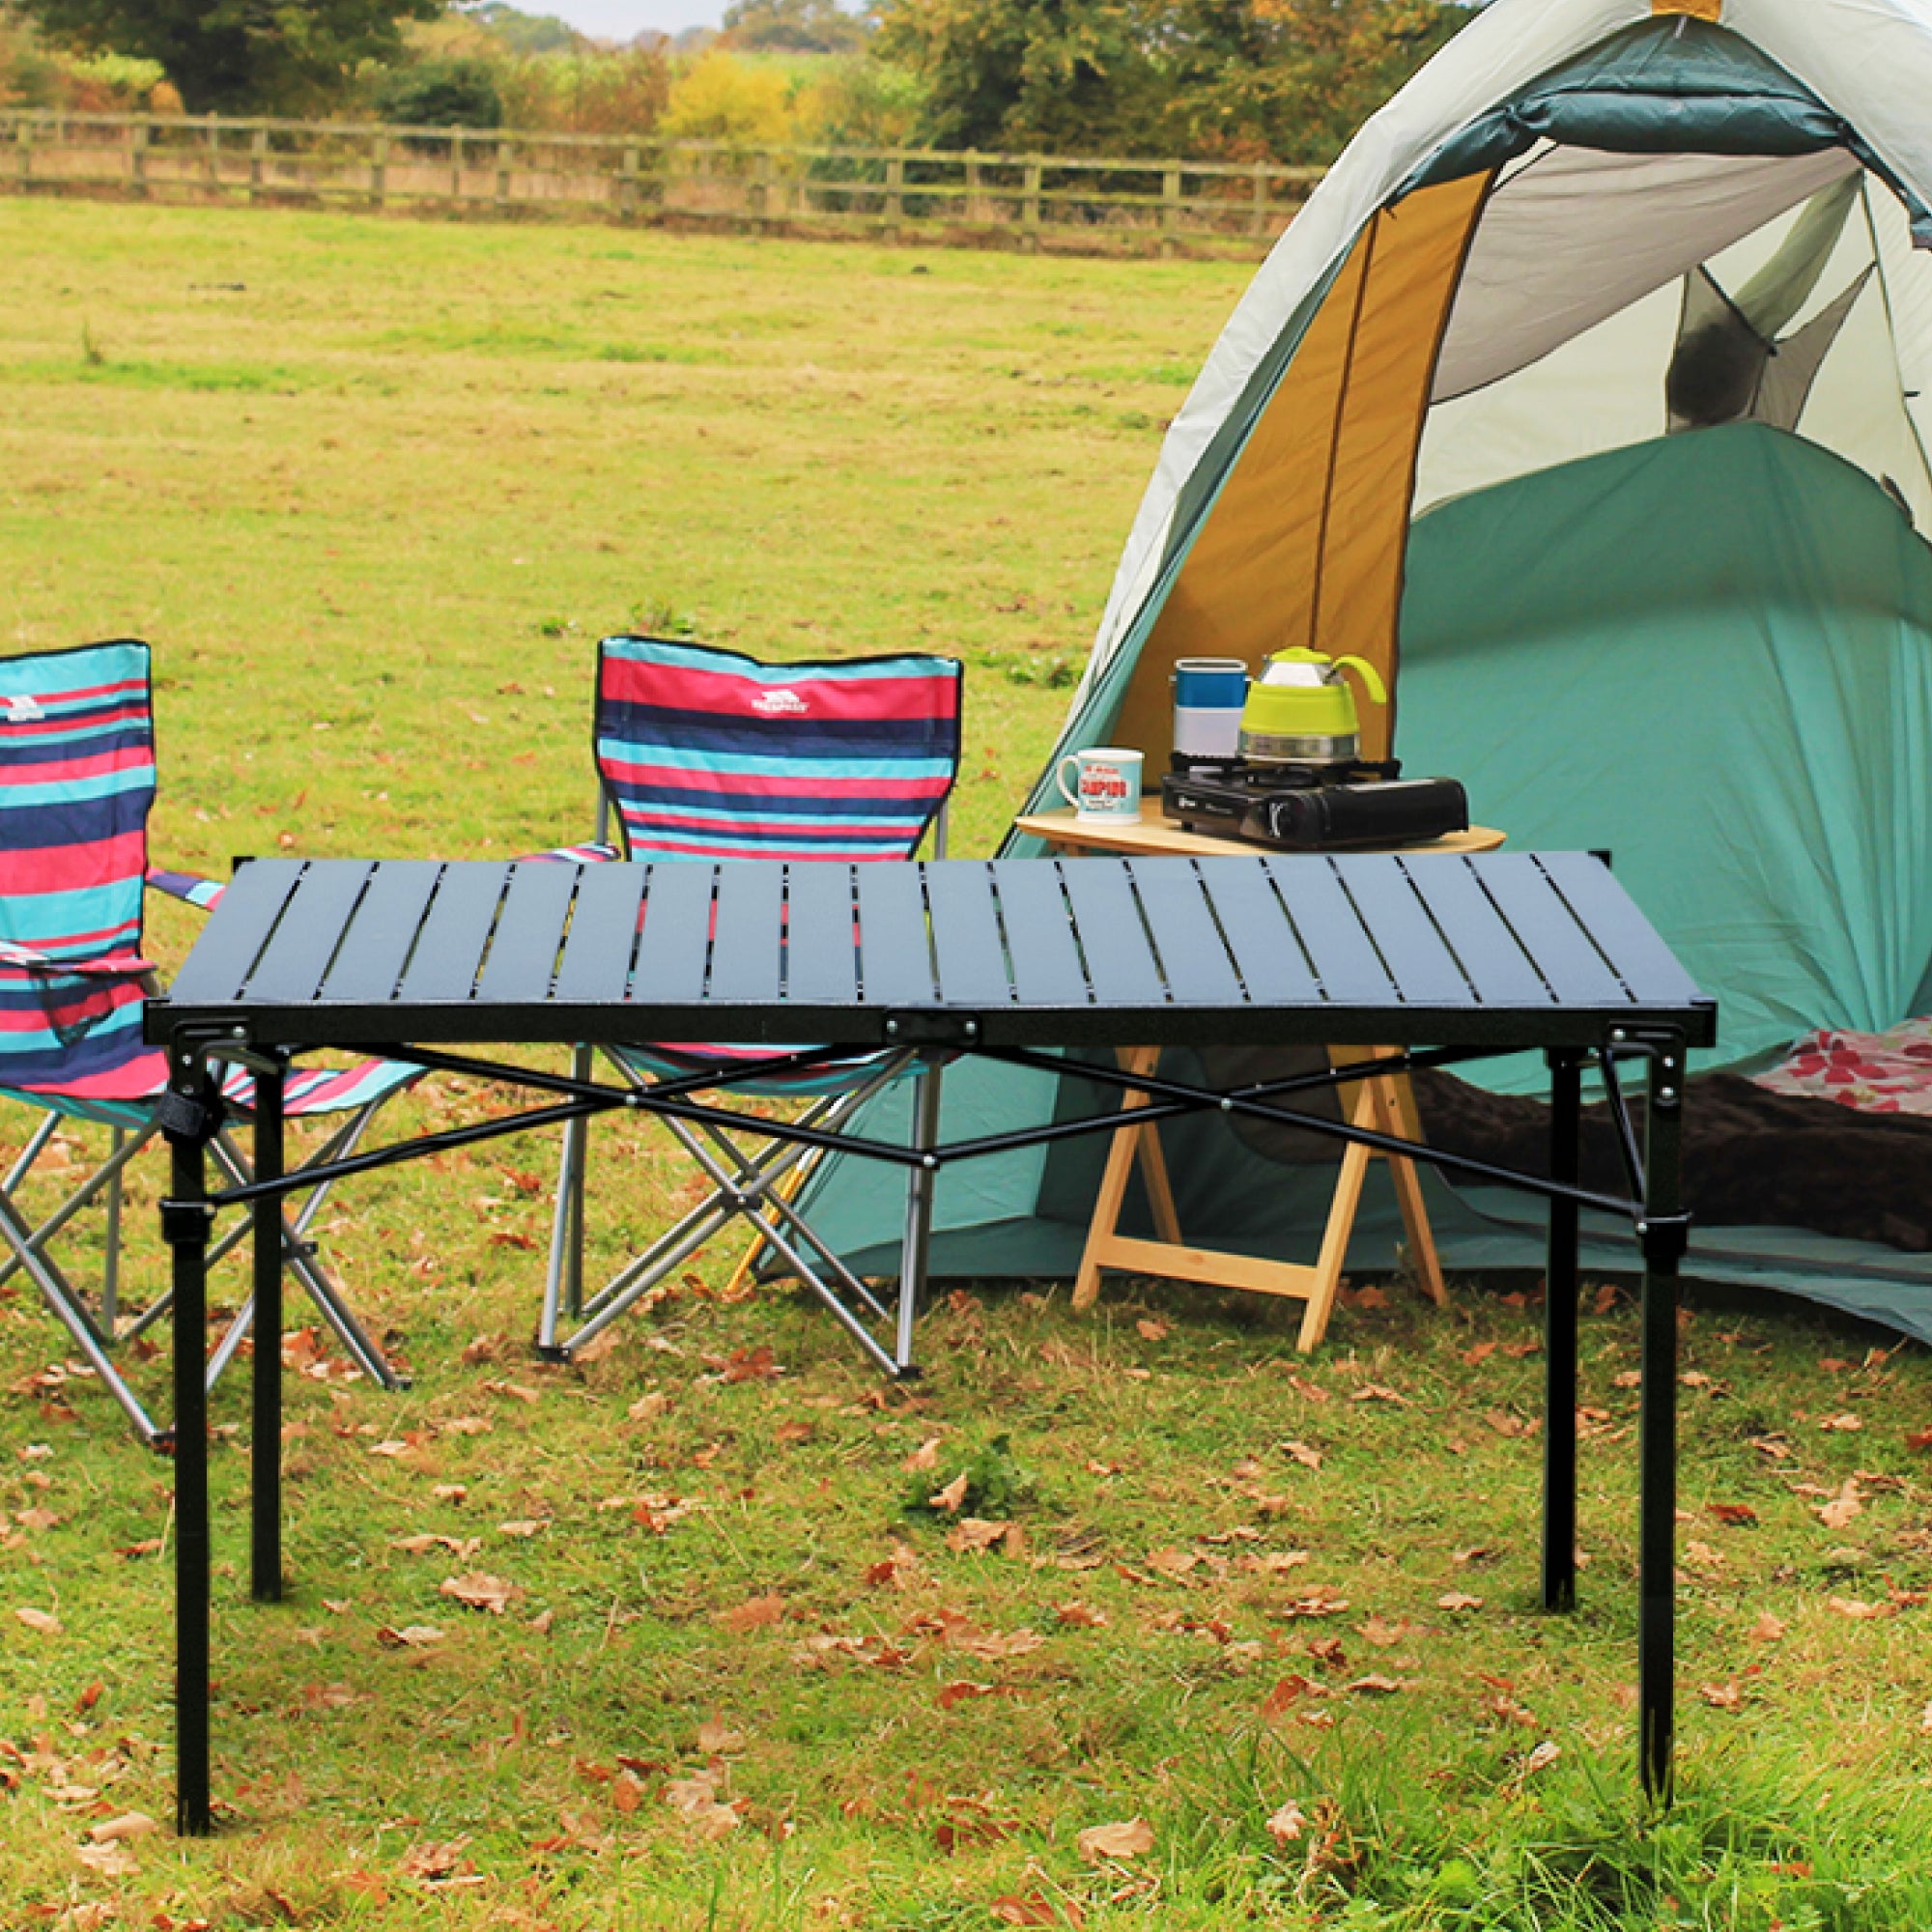 Simple Setup Short Table All-Purpose Use and Portability - Beach Picnic Camp